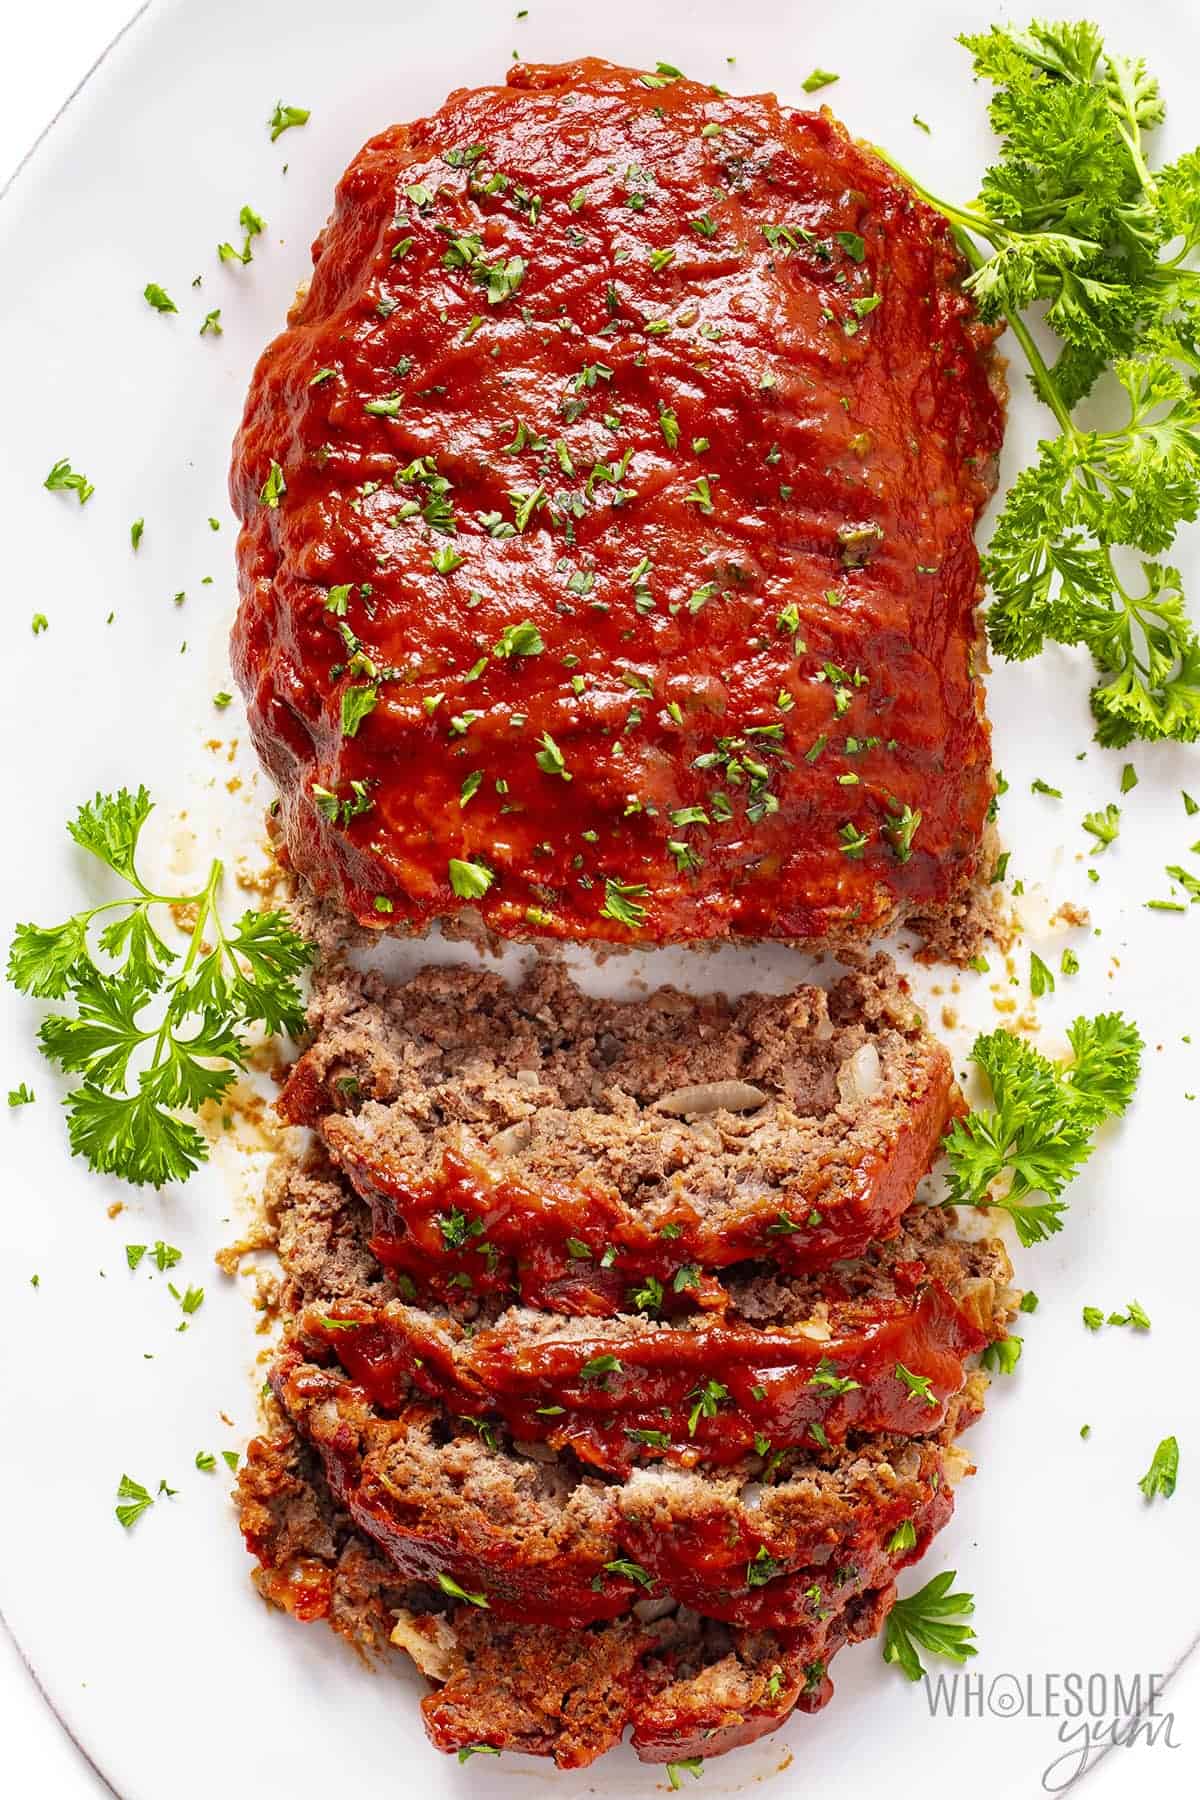 Low carb meatloaf recipe - overhead view.